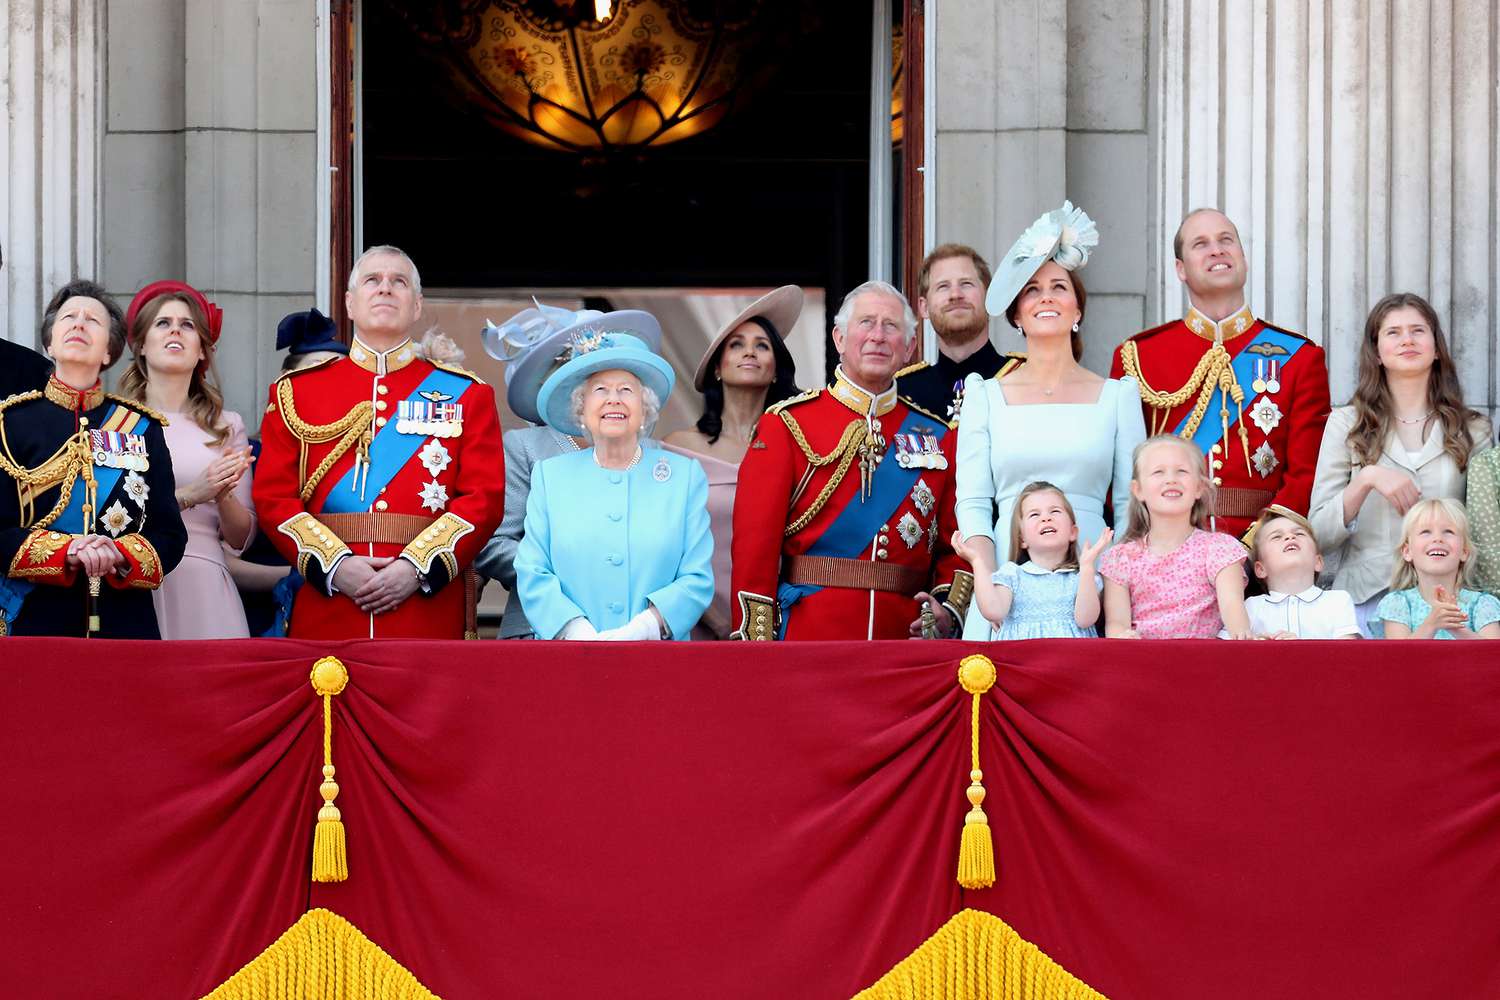 King Charles and Prince William Extend Gratitude for Trooping the Colour Celebrations